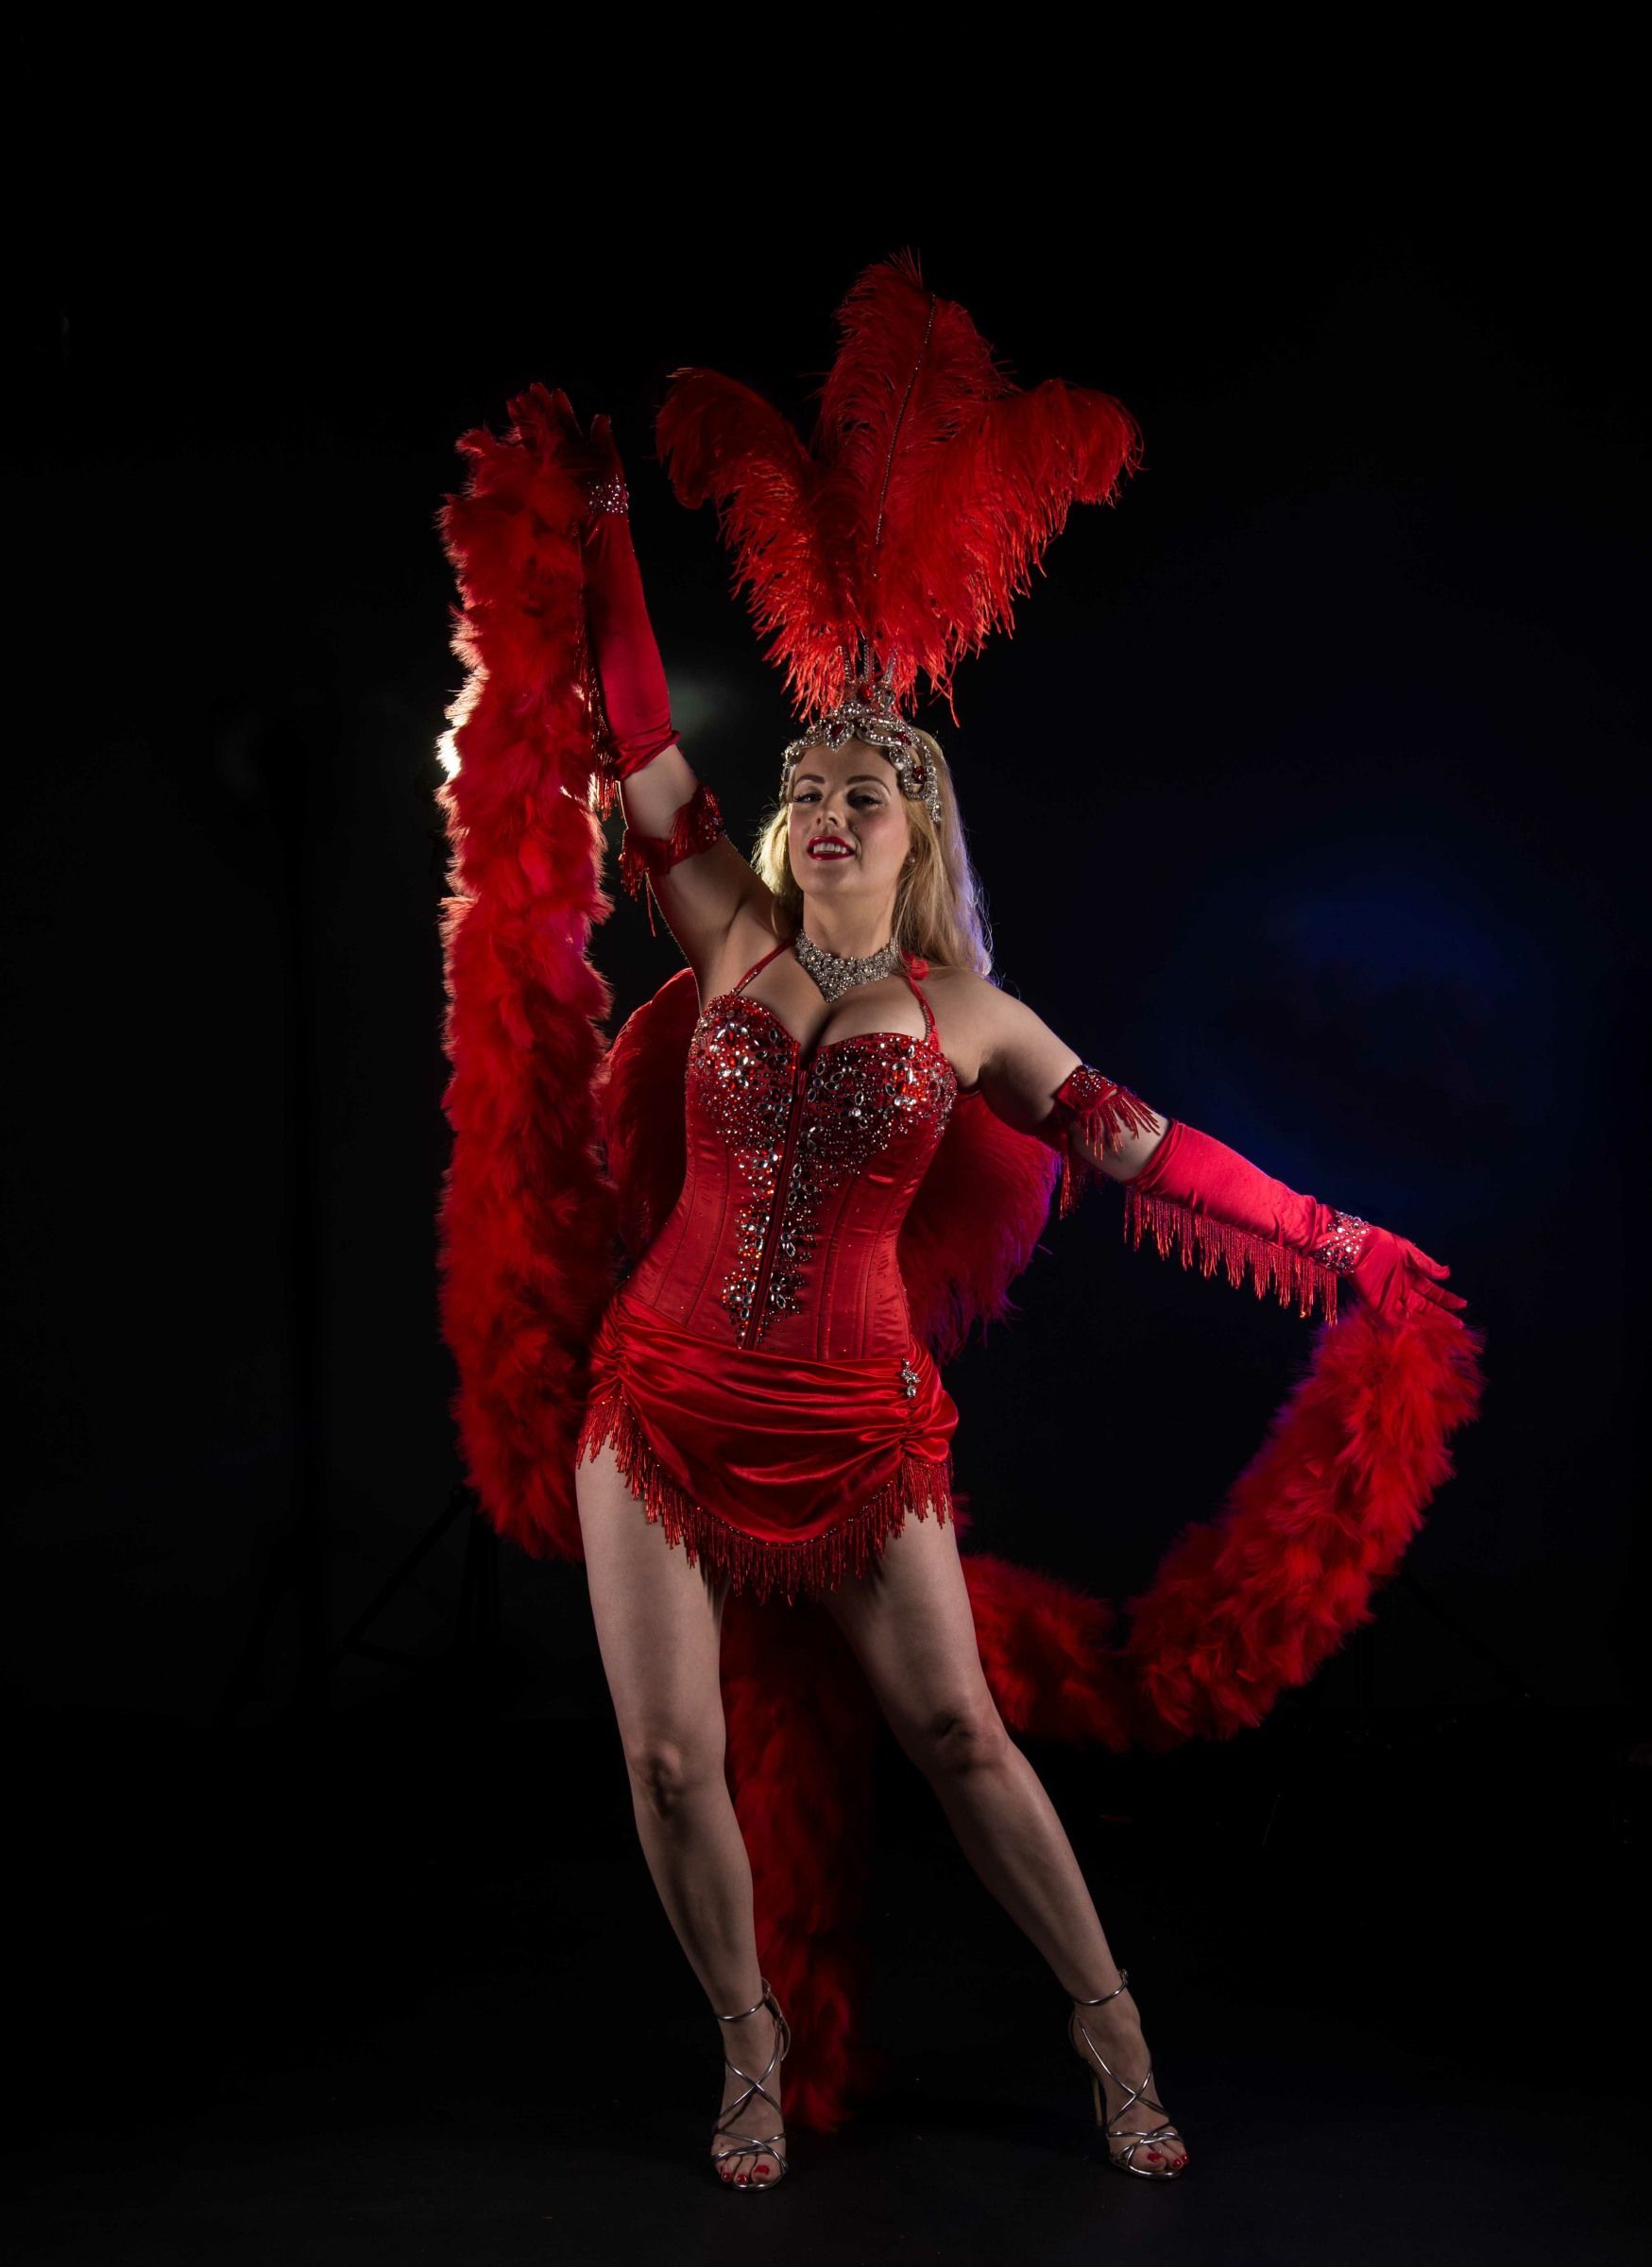 Showgirl Burlesque act red outfit red feathered headdress and tail on black background